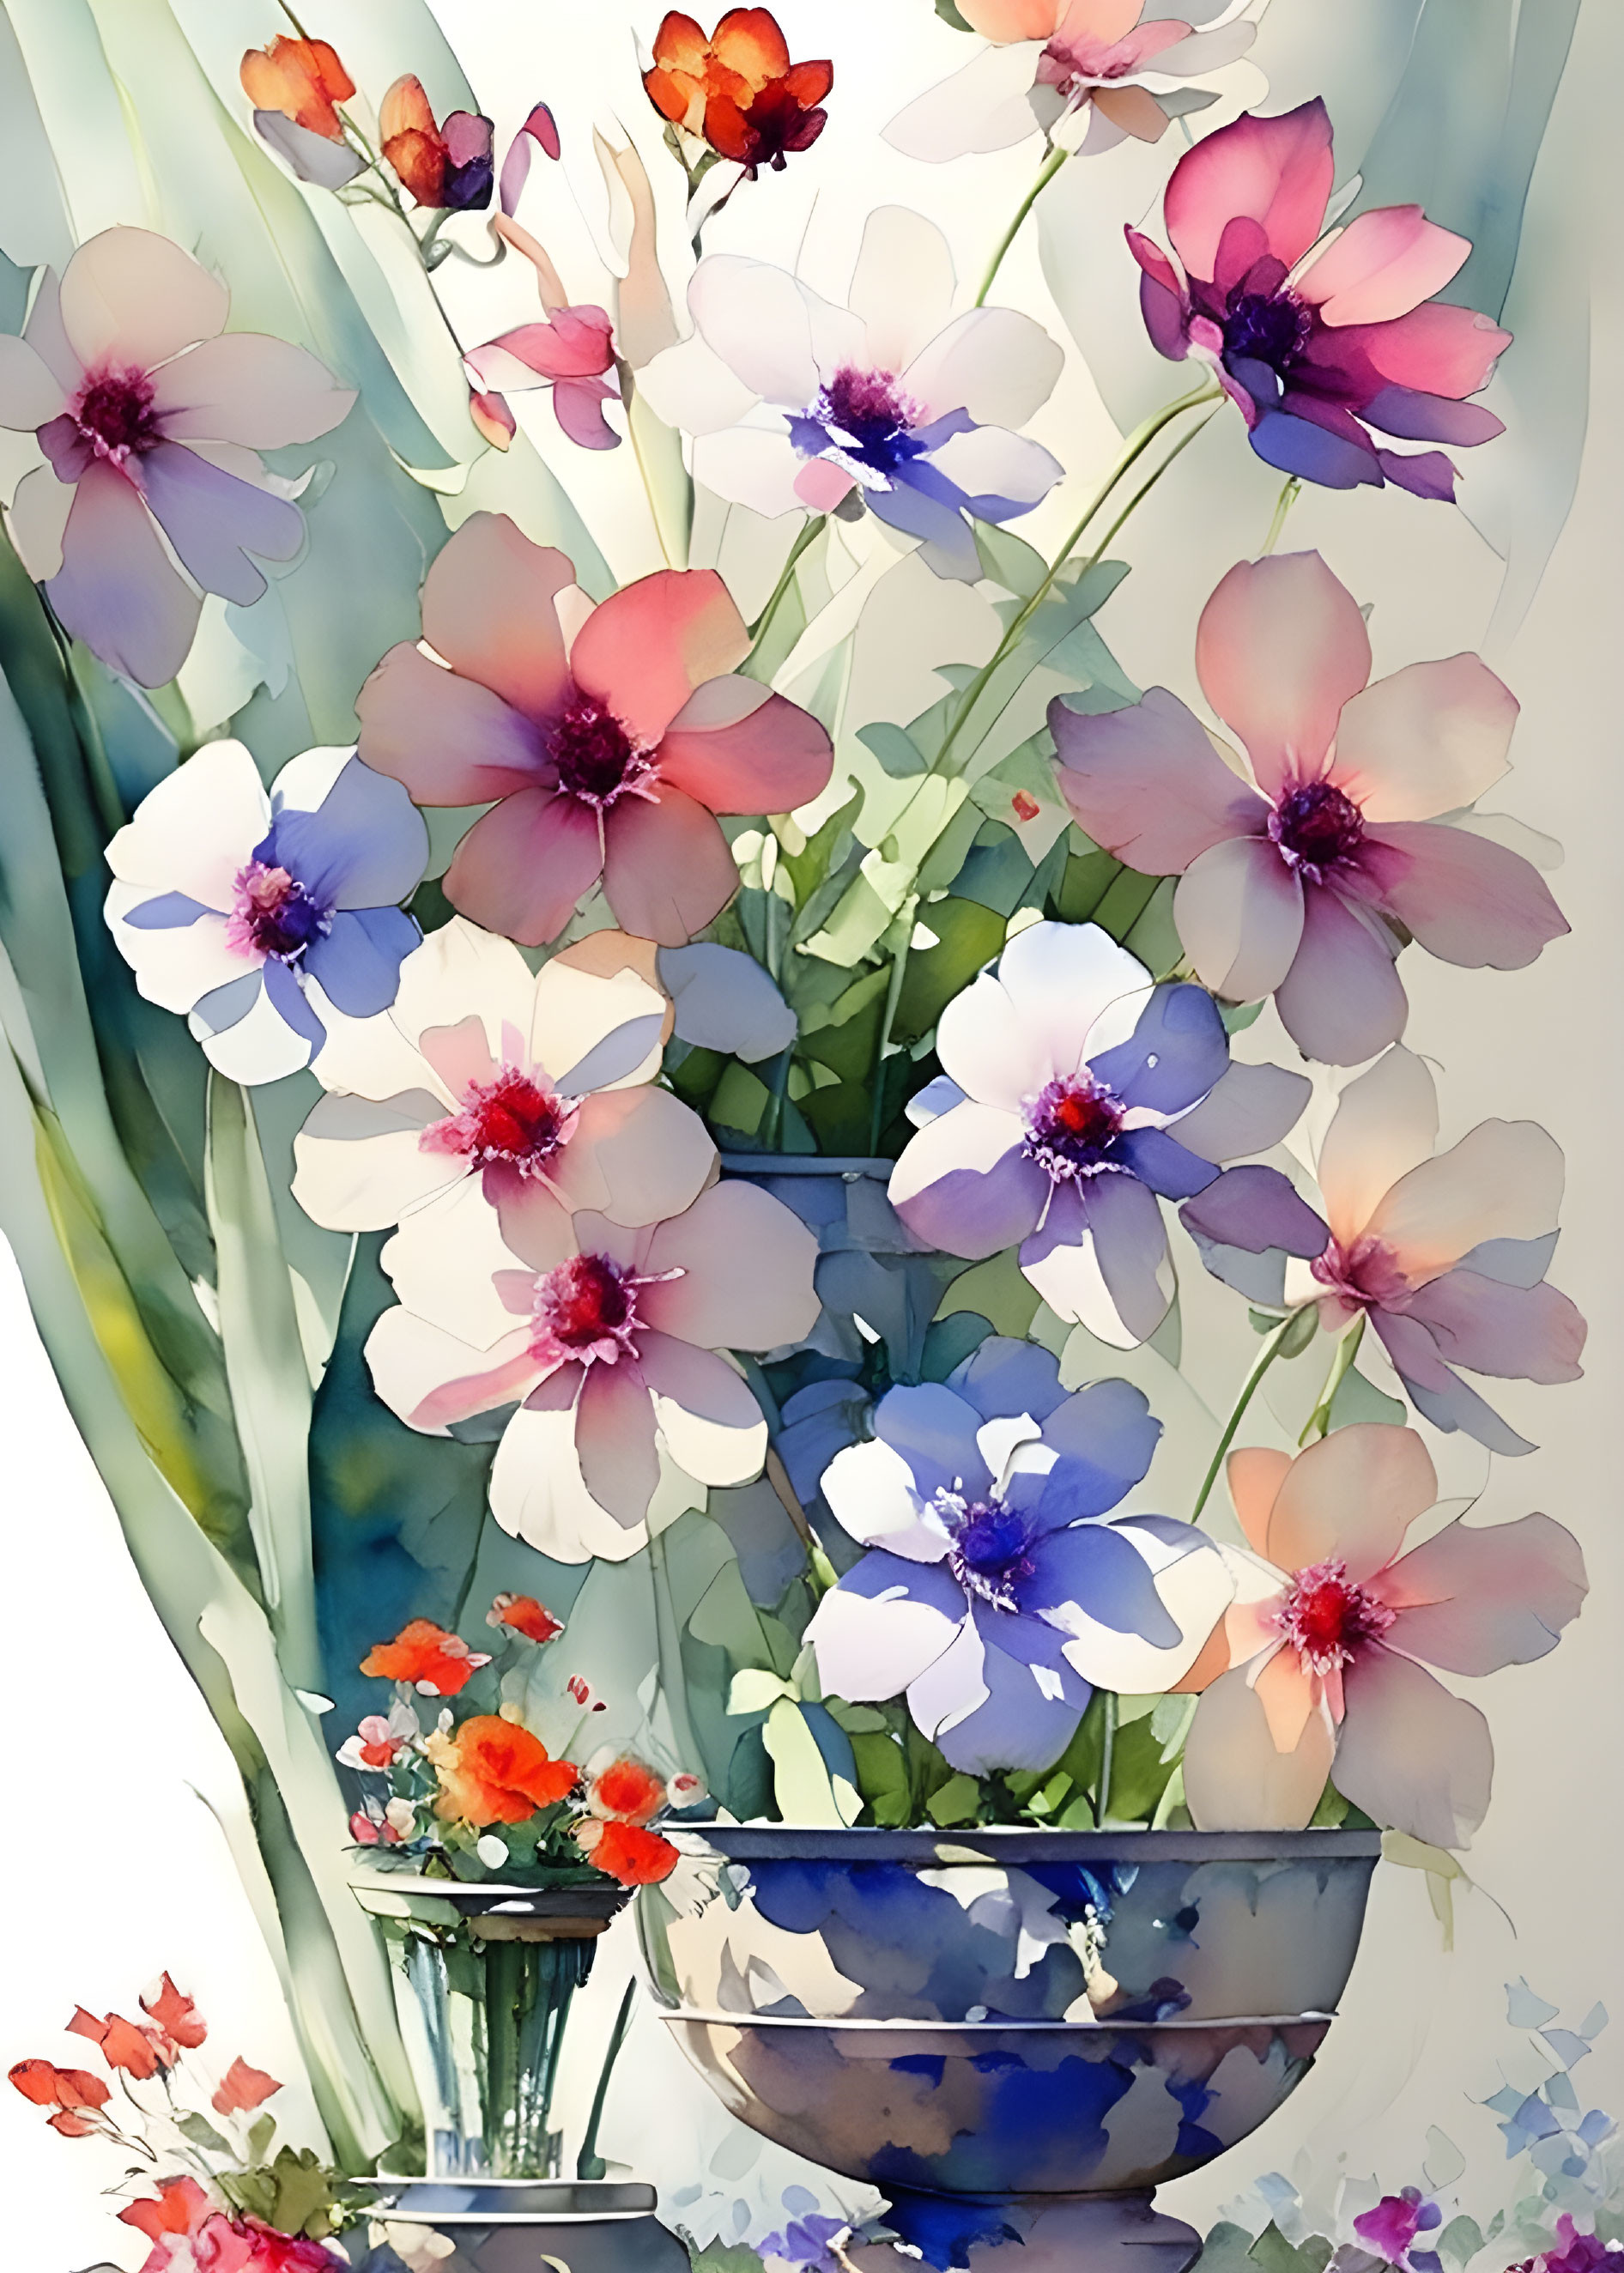 Colorful Watercolor Painting of Pink, Purple, and Blue Cosmos Flowers in a Bowl